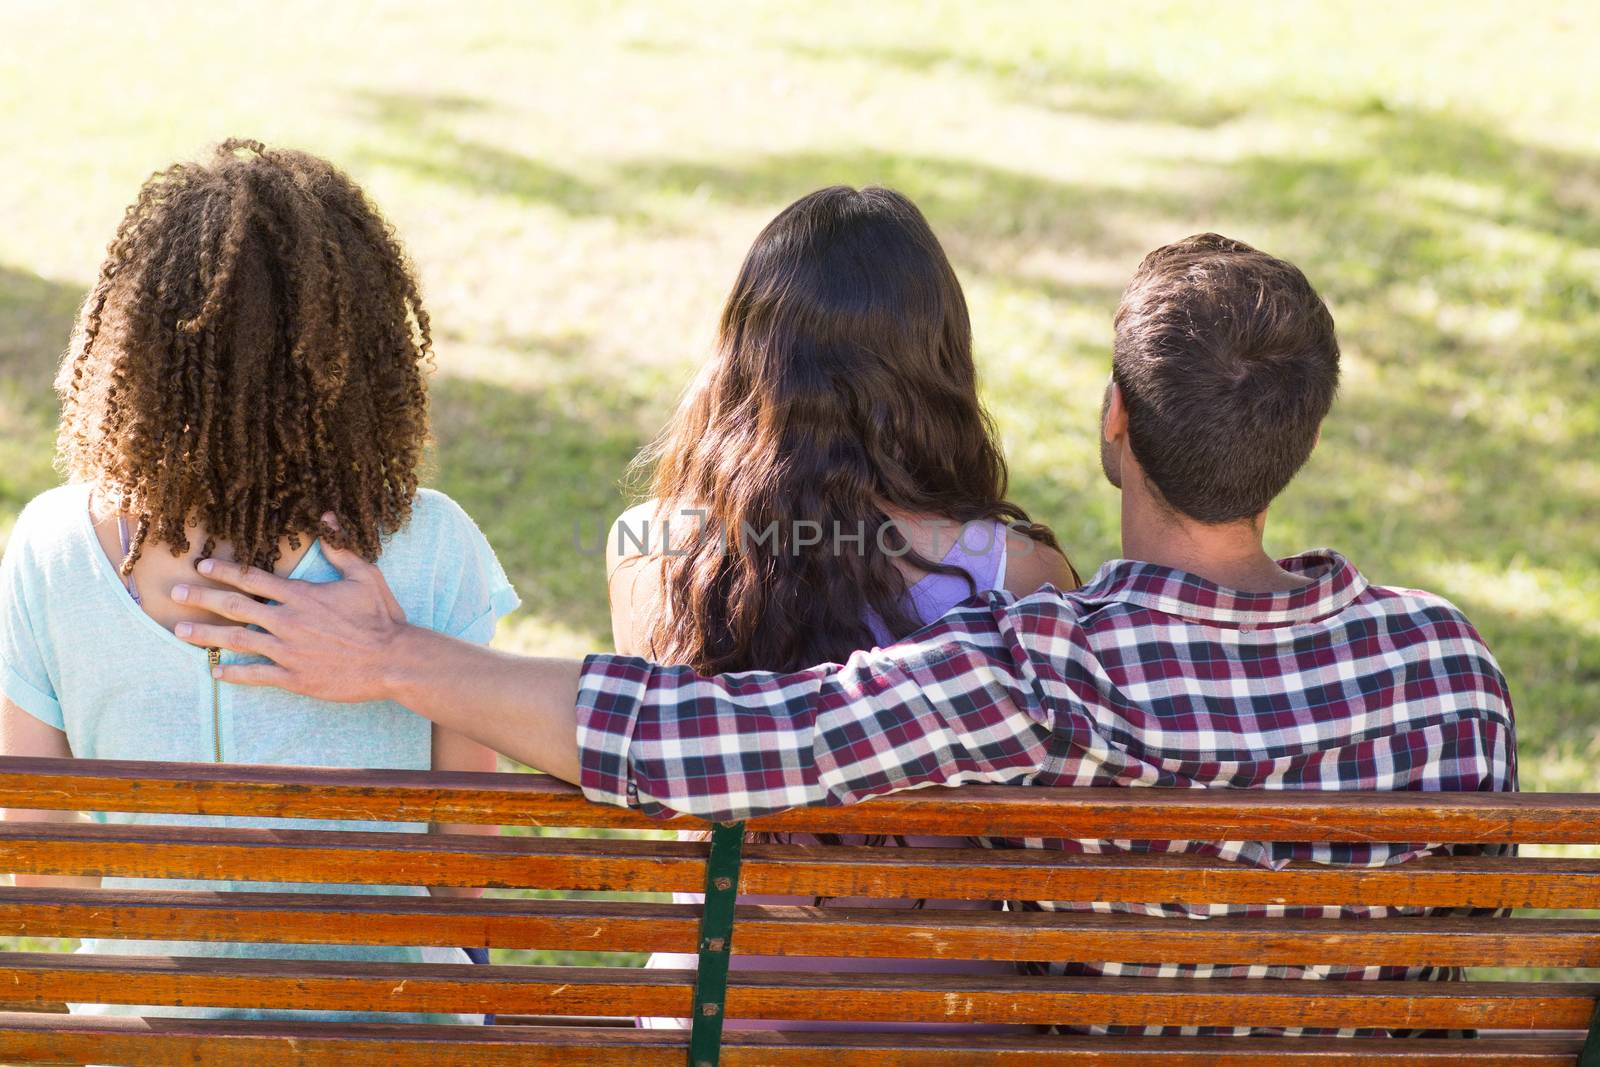 Man being unfaithful in the park by Wavebreakmedia